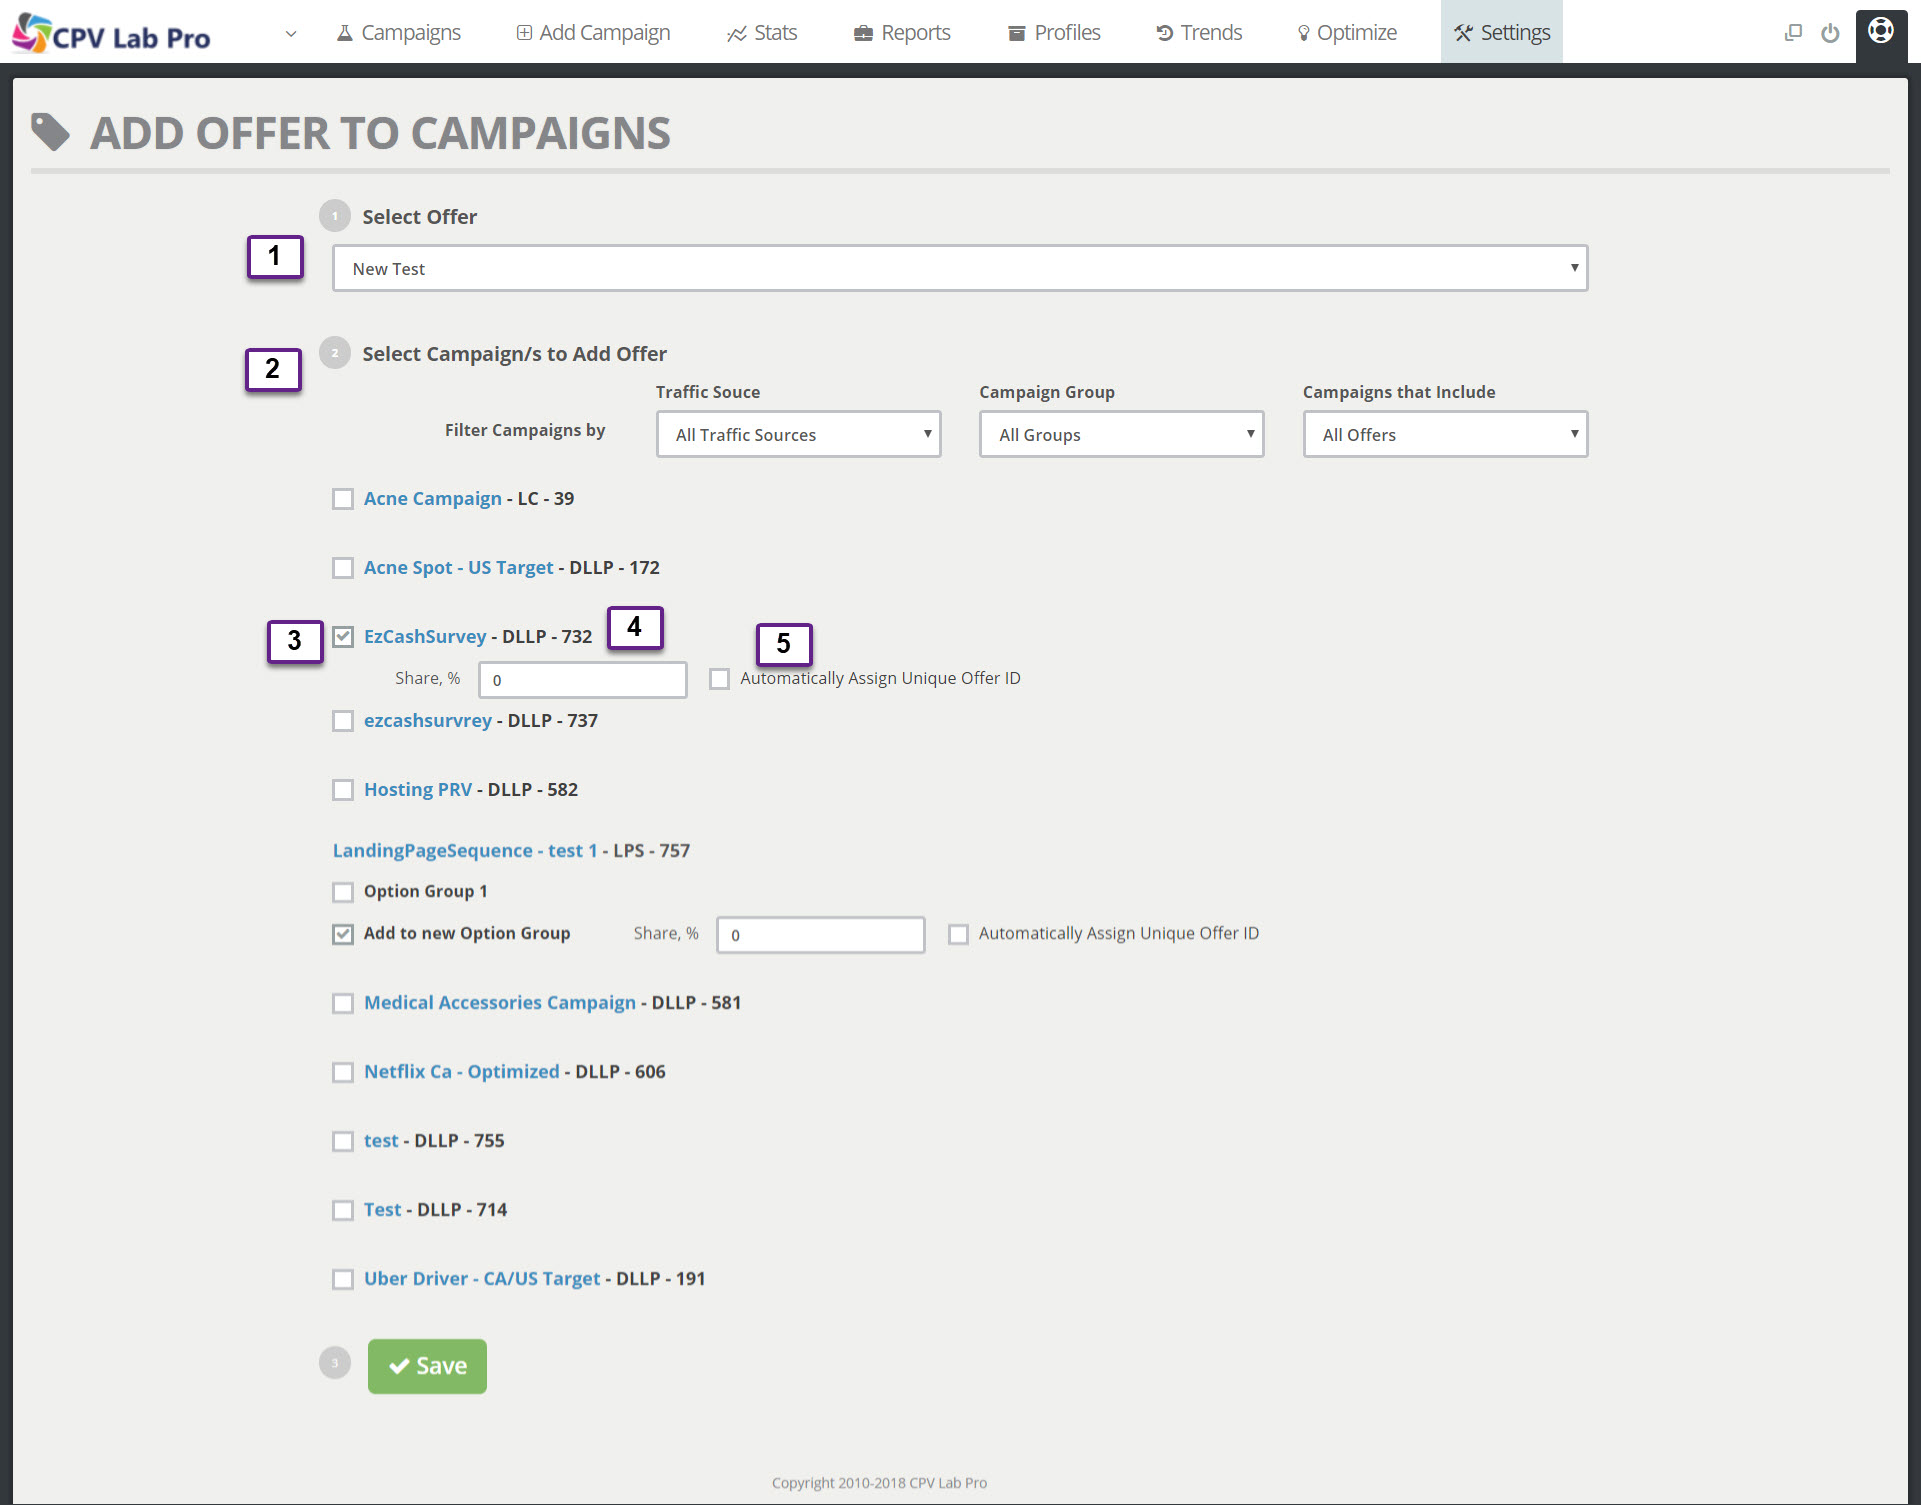 Add Offer to Campaigns Page